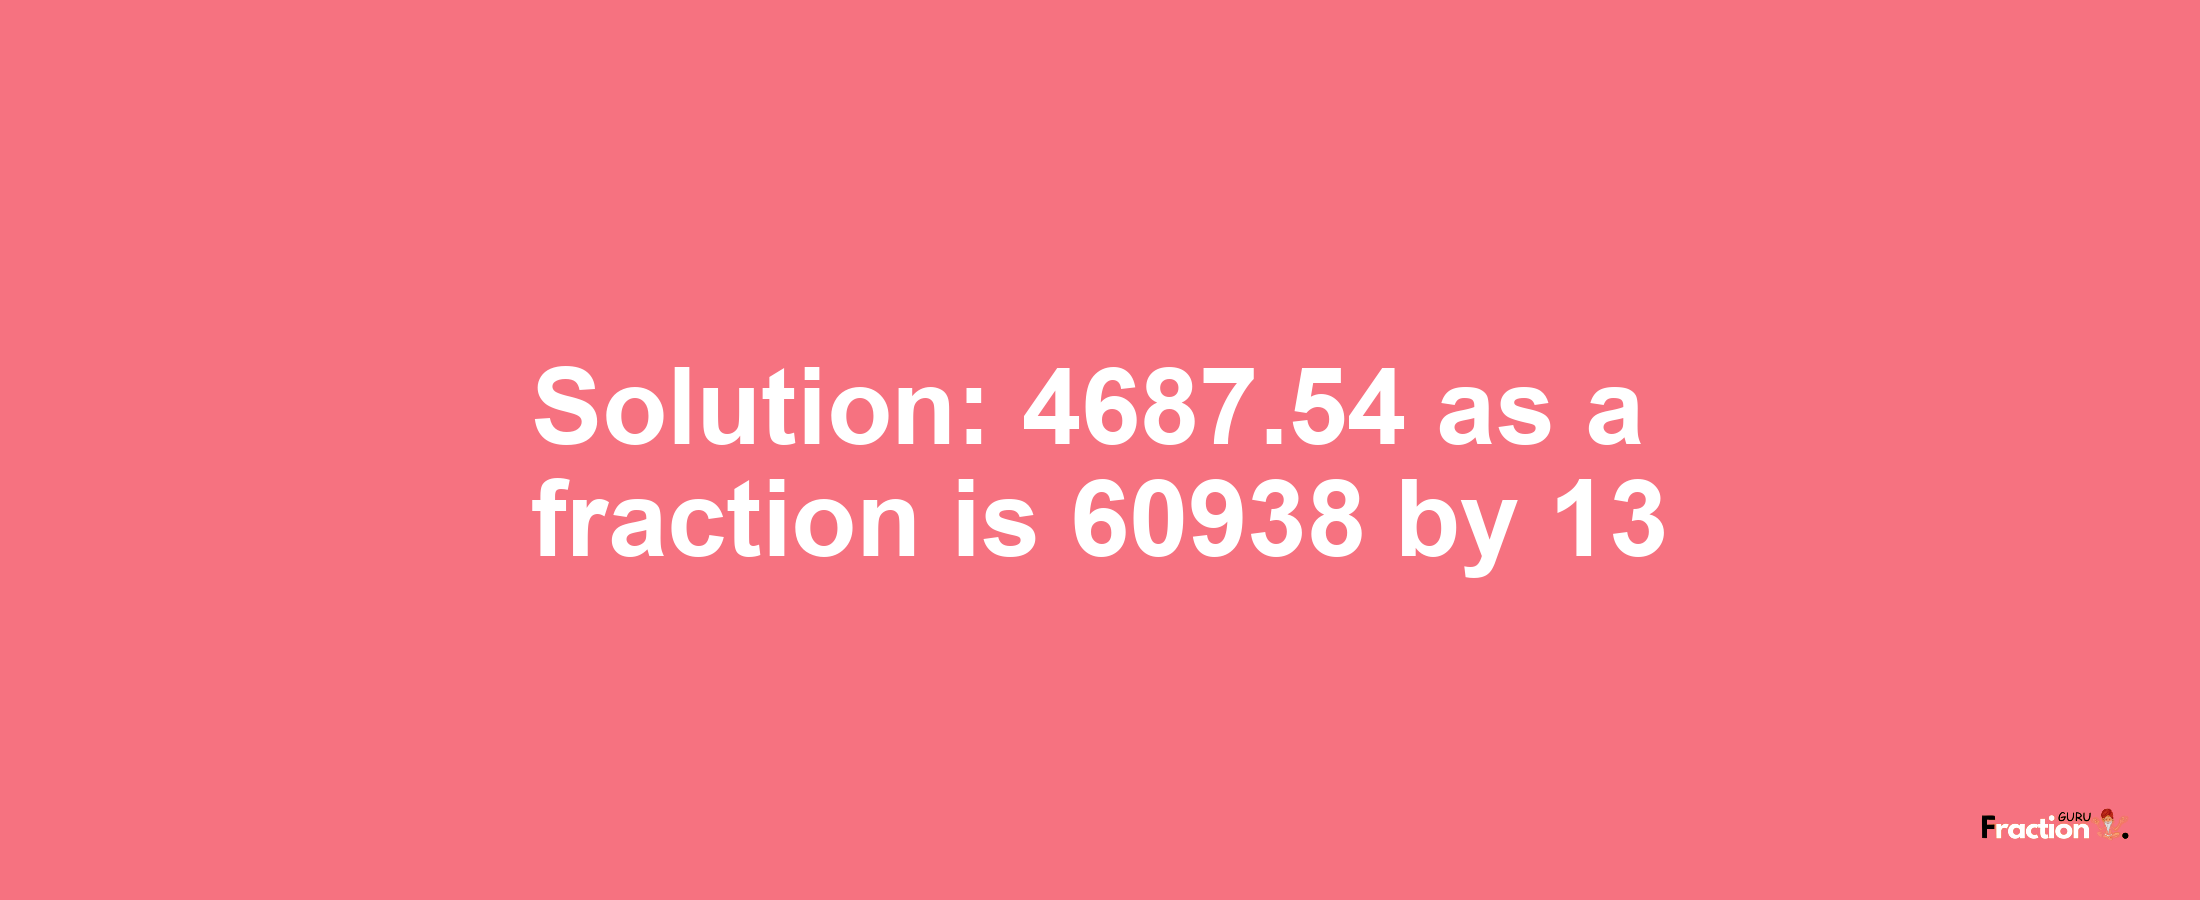 Solution:4687.54 as a fraction is 60938/13